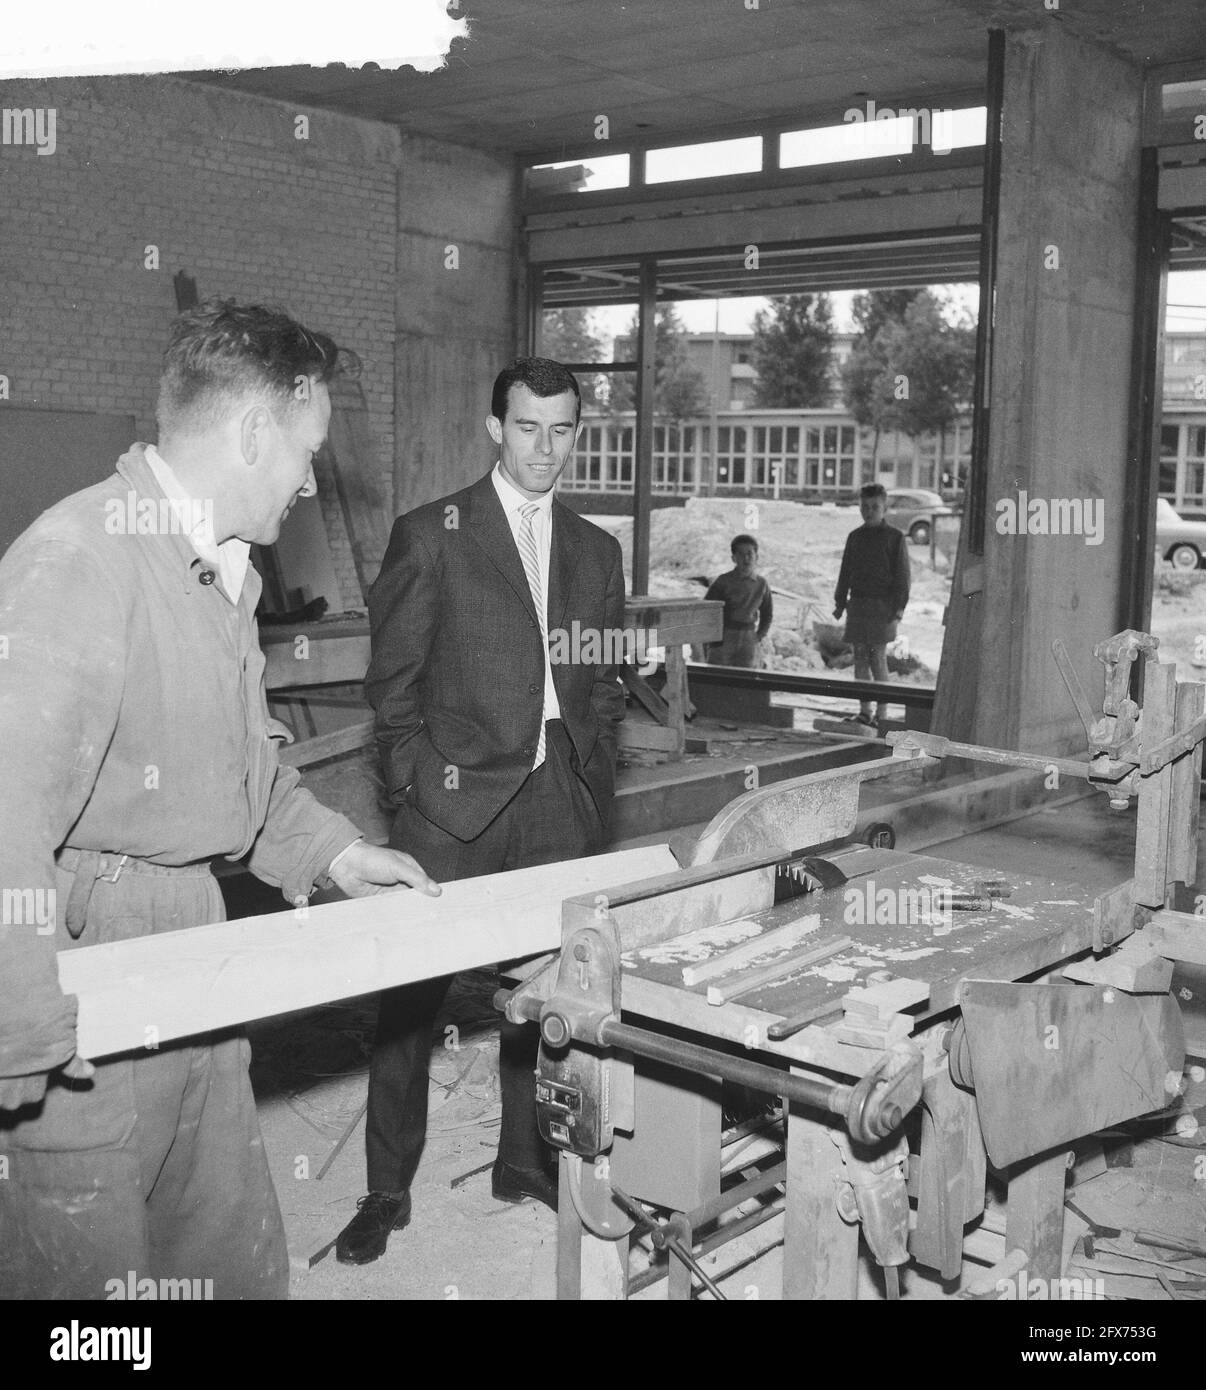 Coen Moulijn in his store under construction, June 1, 1961, construction, soccer players, stores, The Netherlands, 20th century press agency photo, news to remember, documentary, historic photography 1945-1990, visual stories, human history of the Twentieth Century, capturing moments in time Stock Photo